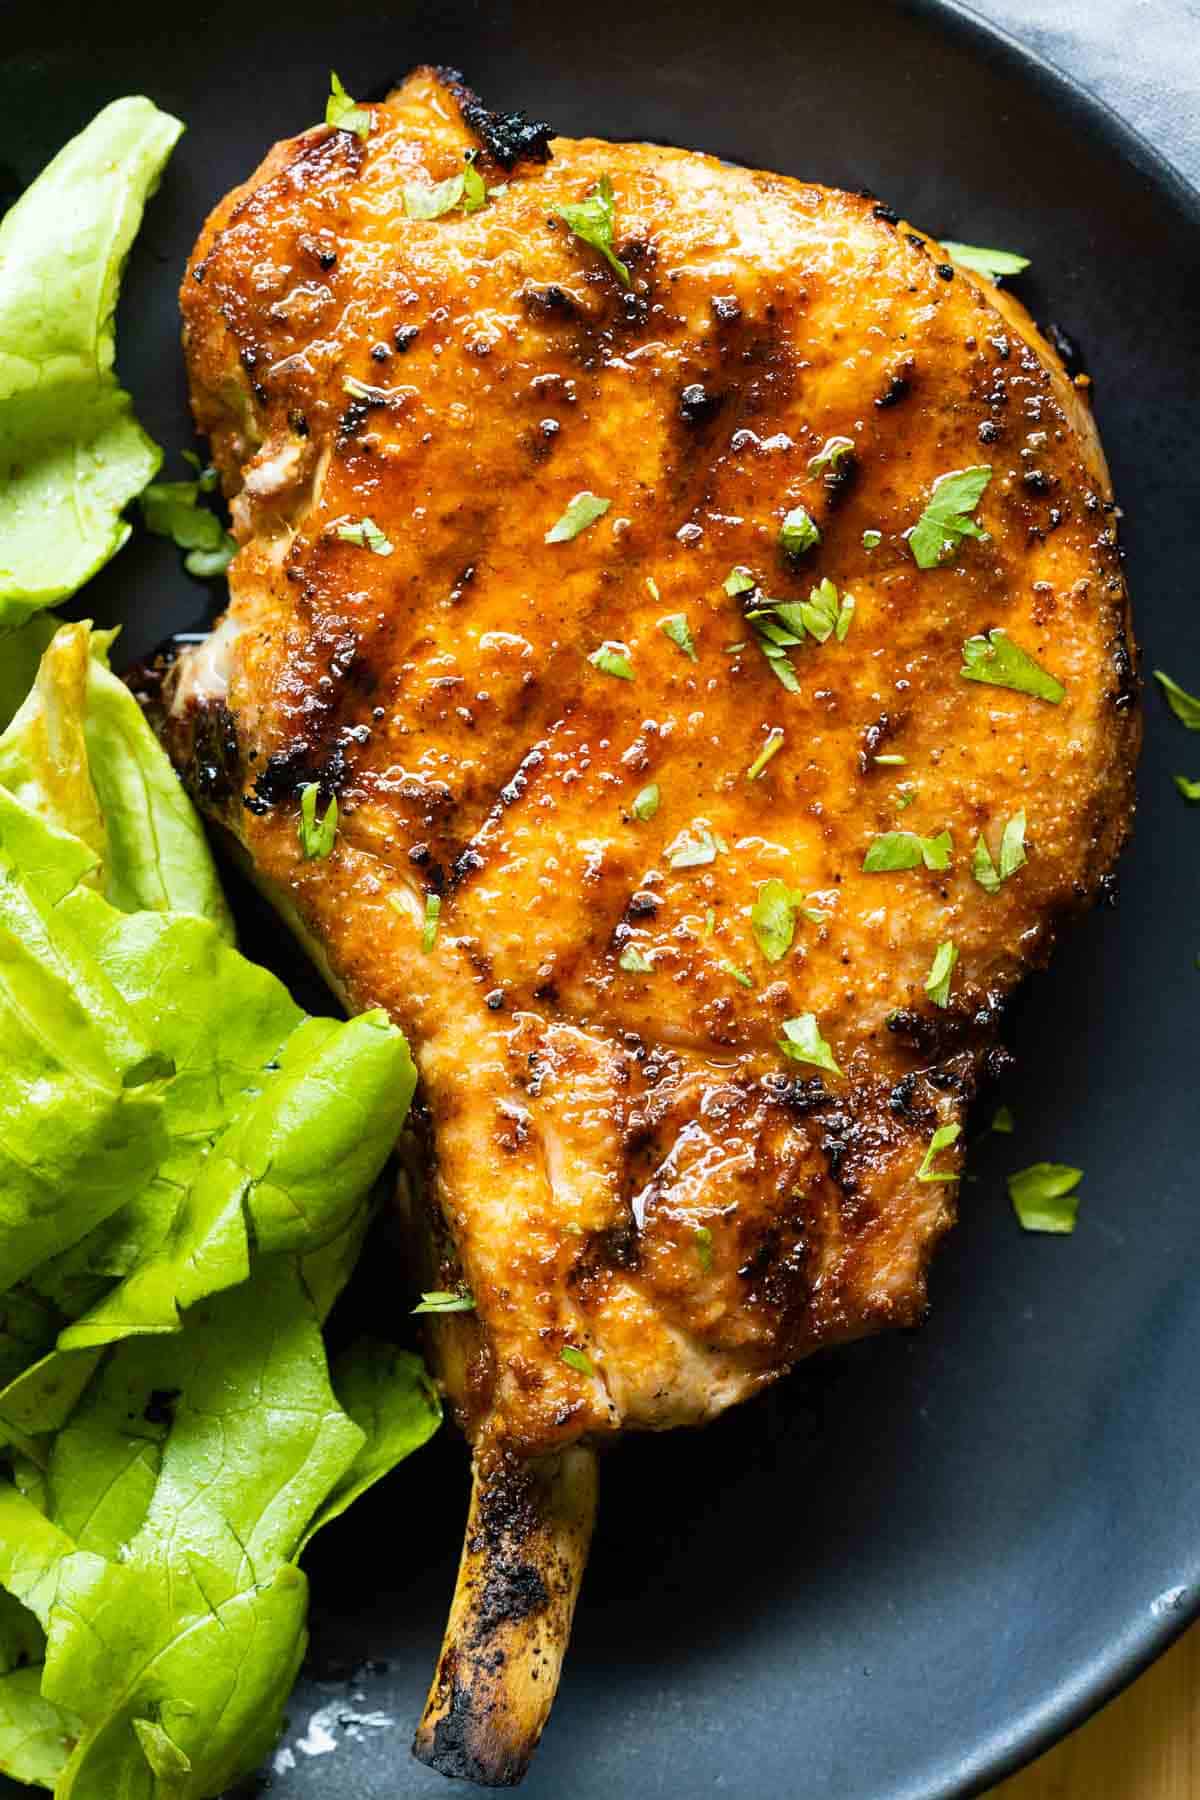 Grilled pork chop on a plate and green lettuce on the side.